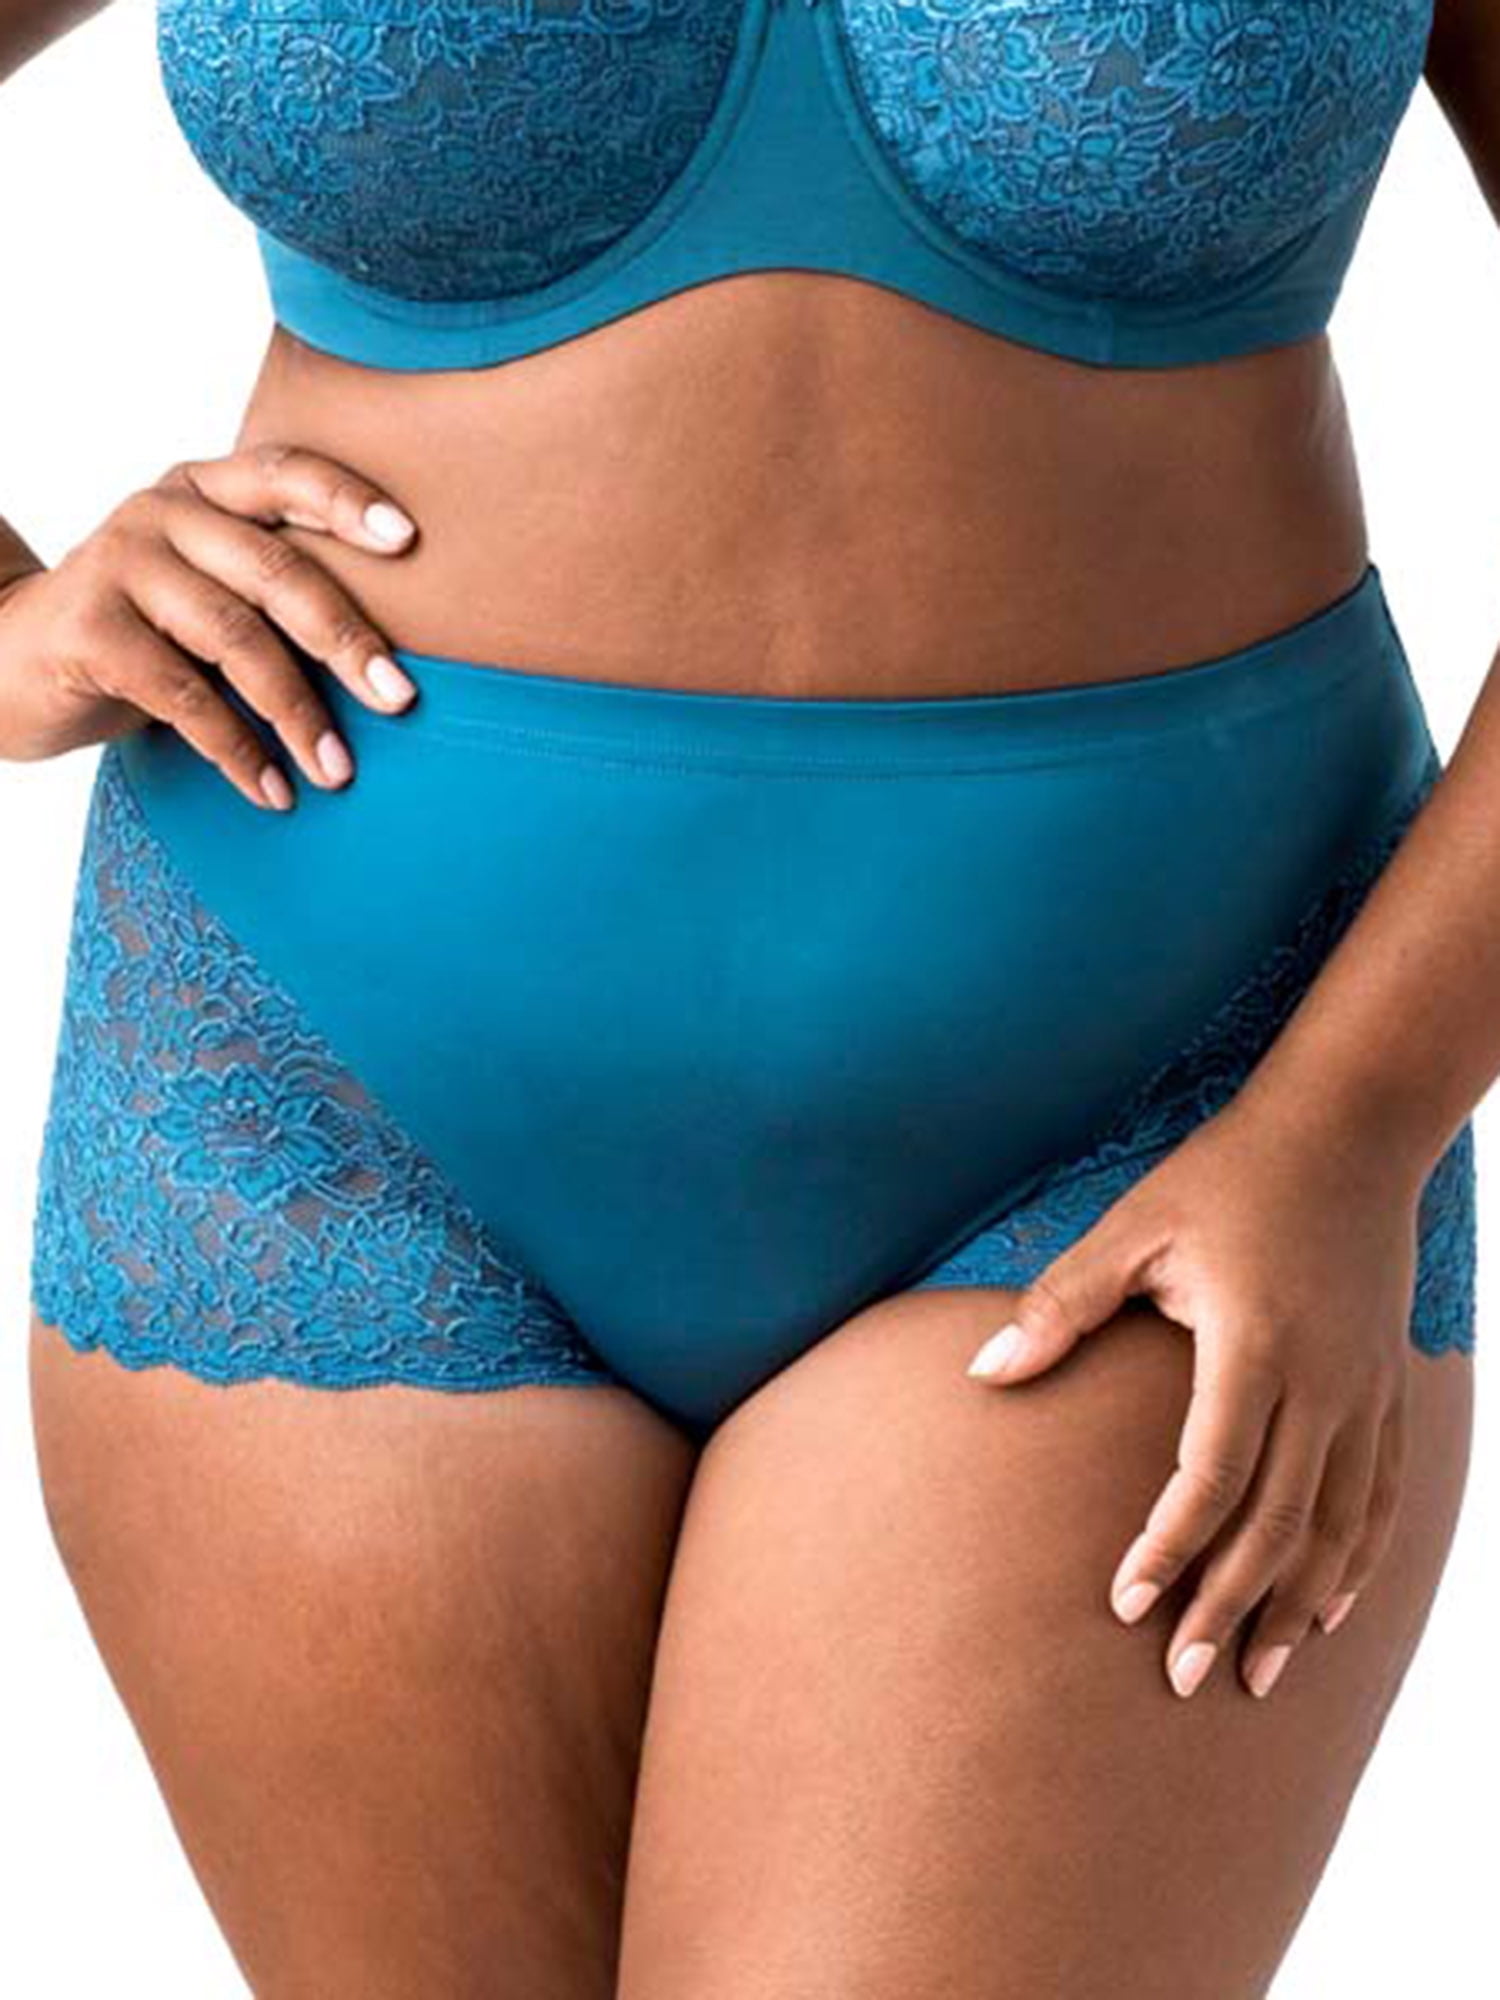 Women's Elila 3311 Cheeky Stretch Lace Panties (Teal 3X)